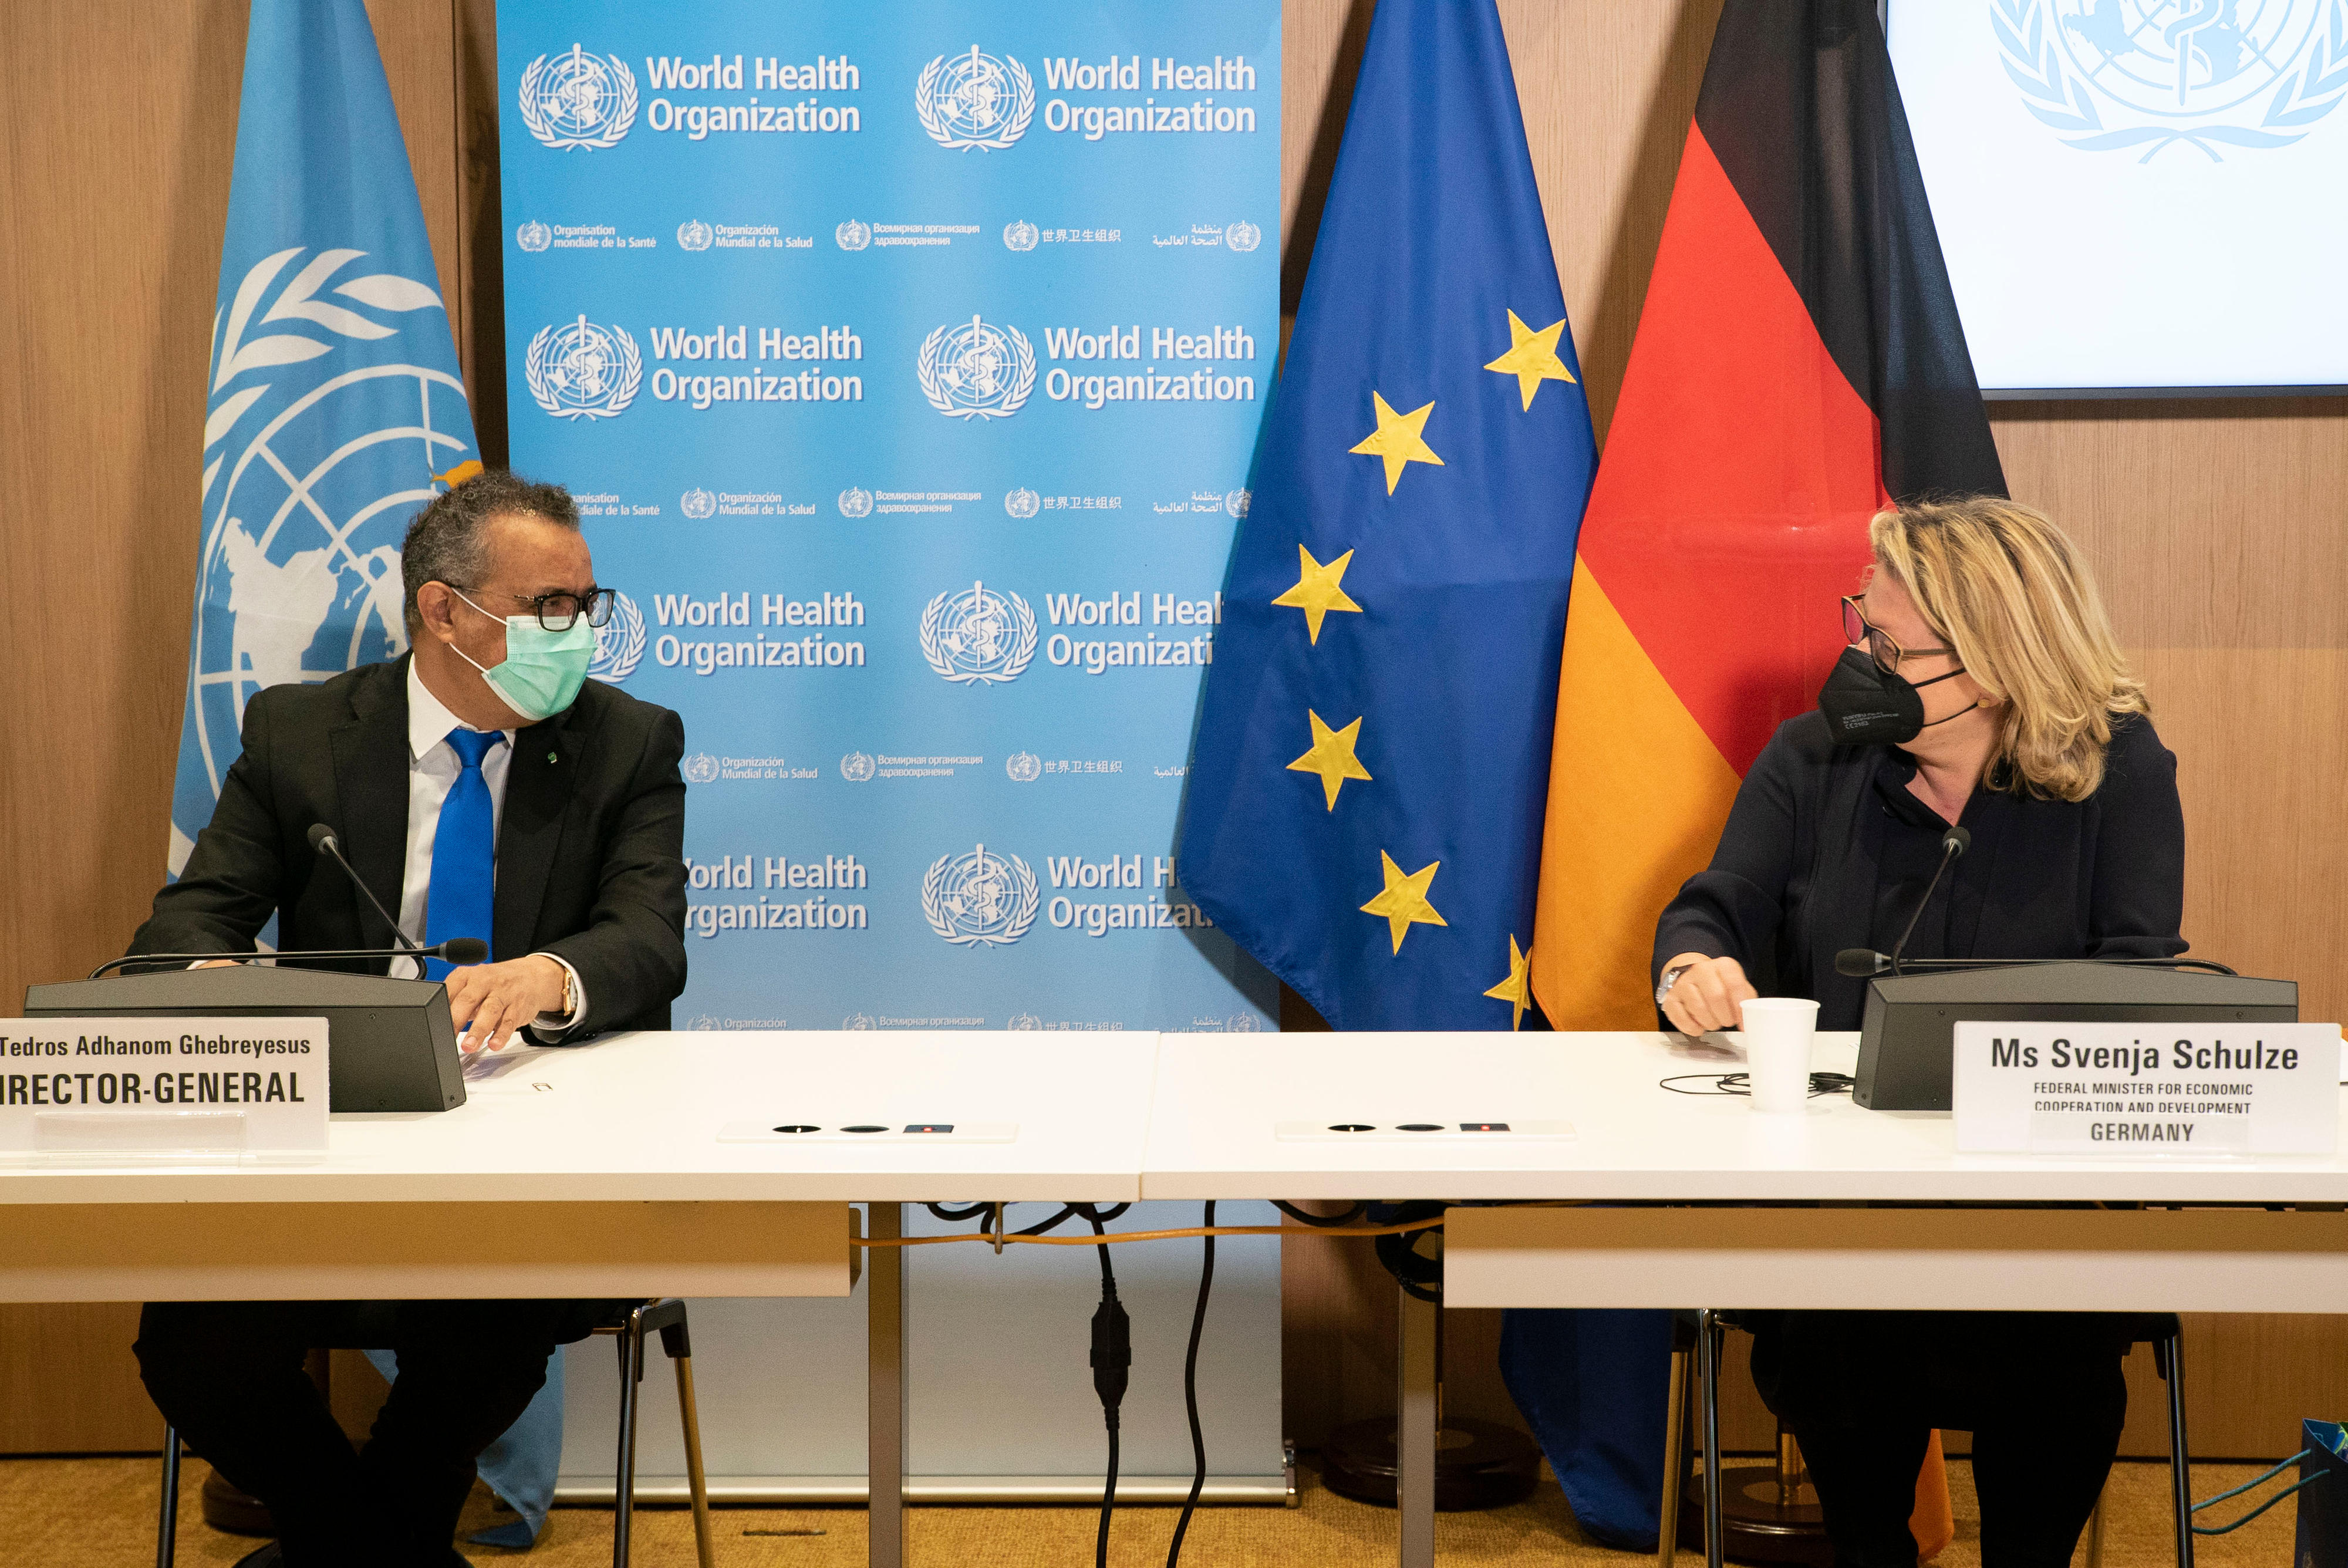 Press conference with Svenja Schulze and the WHO Director-General Dr Tedros Adhanom Ghebreyesus in Geneva.